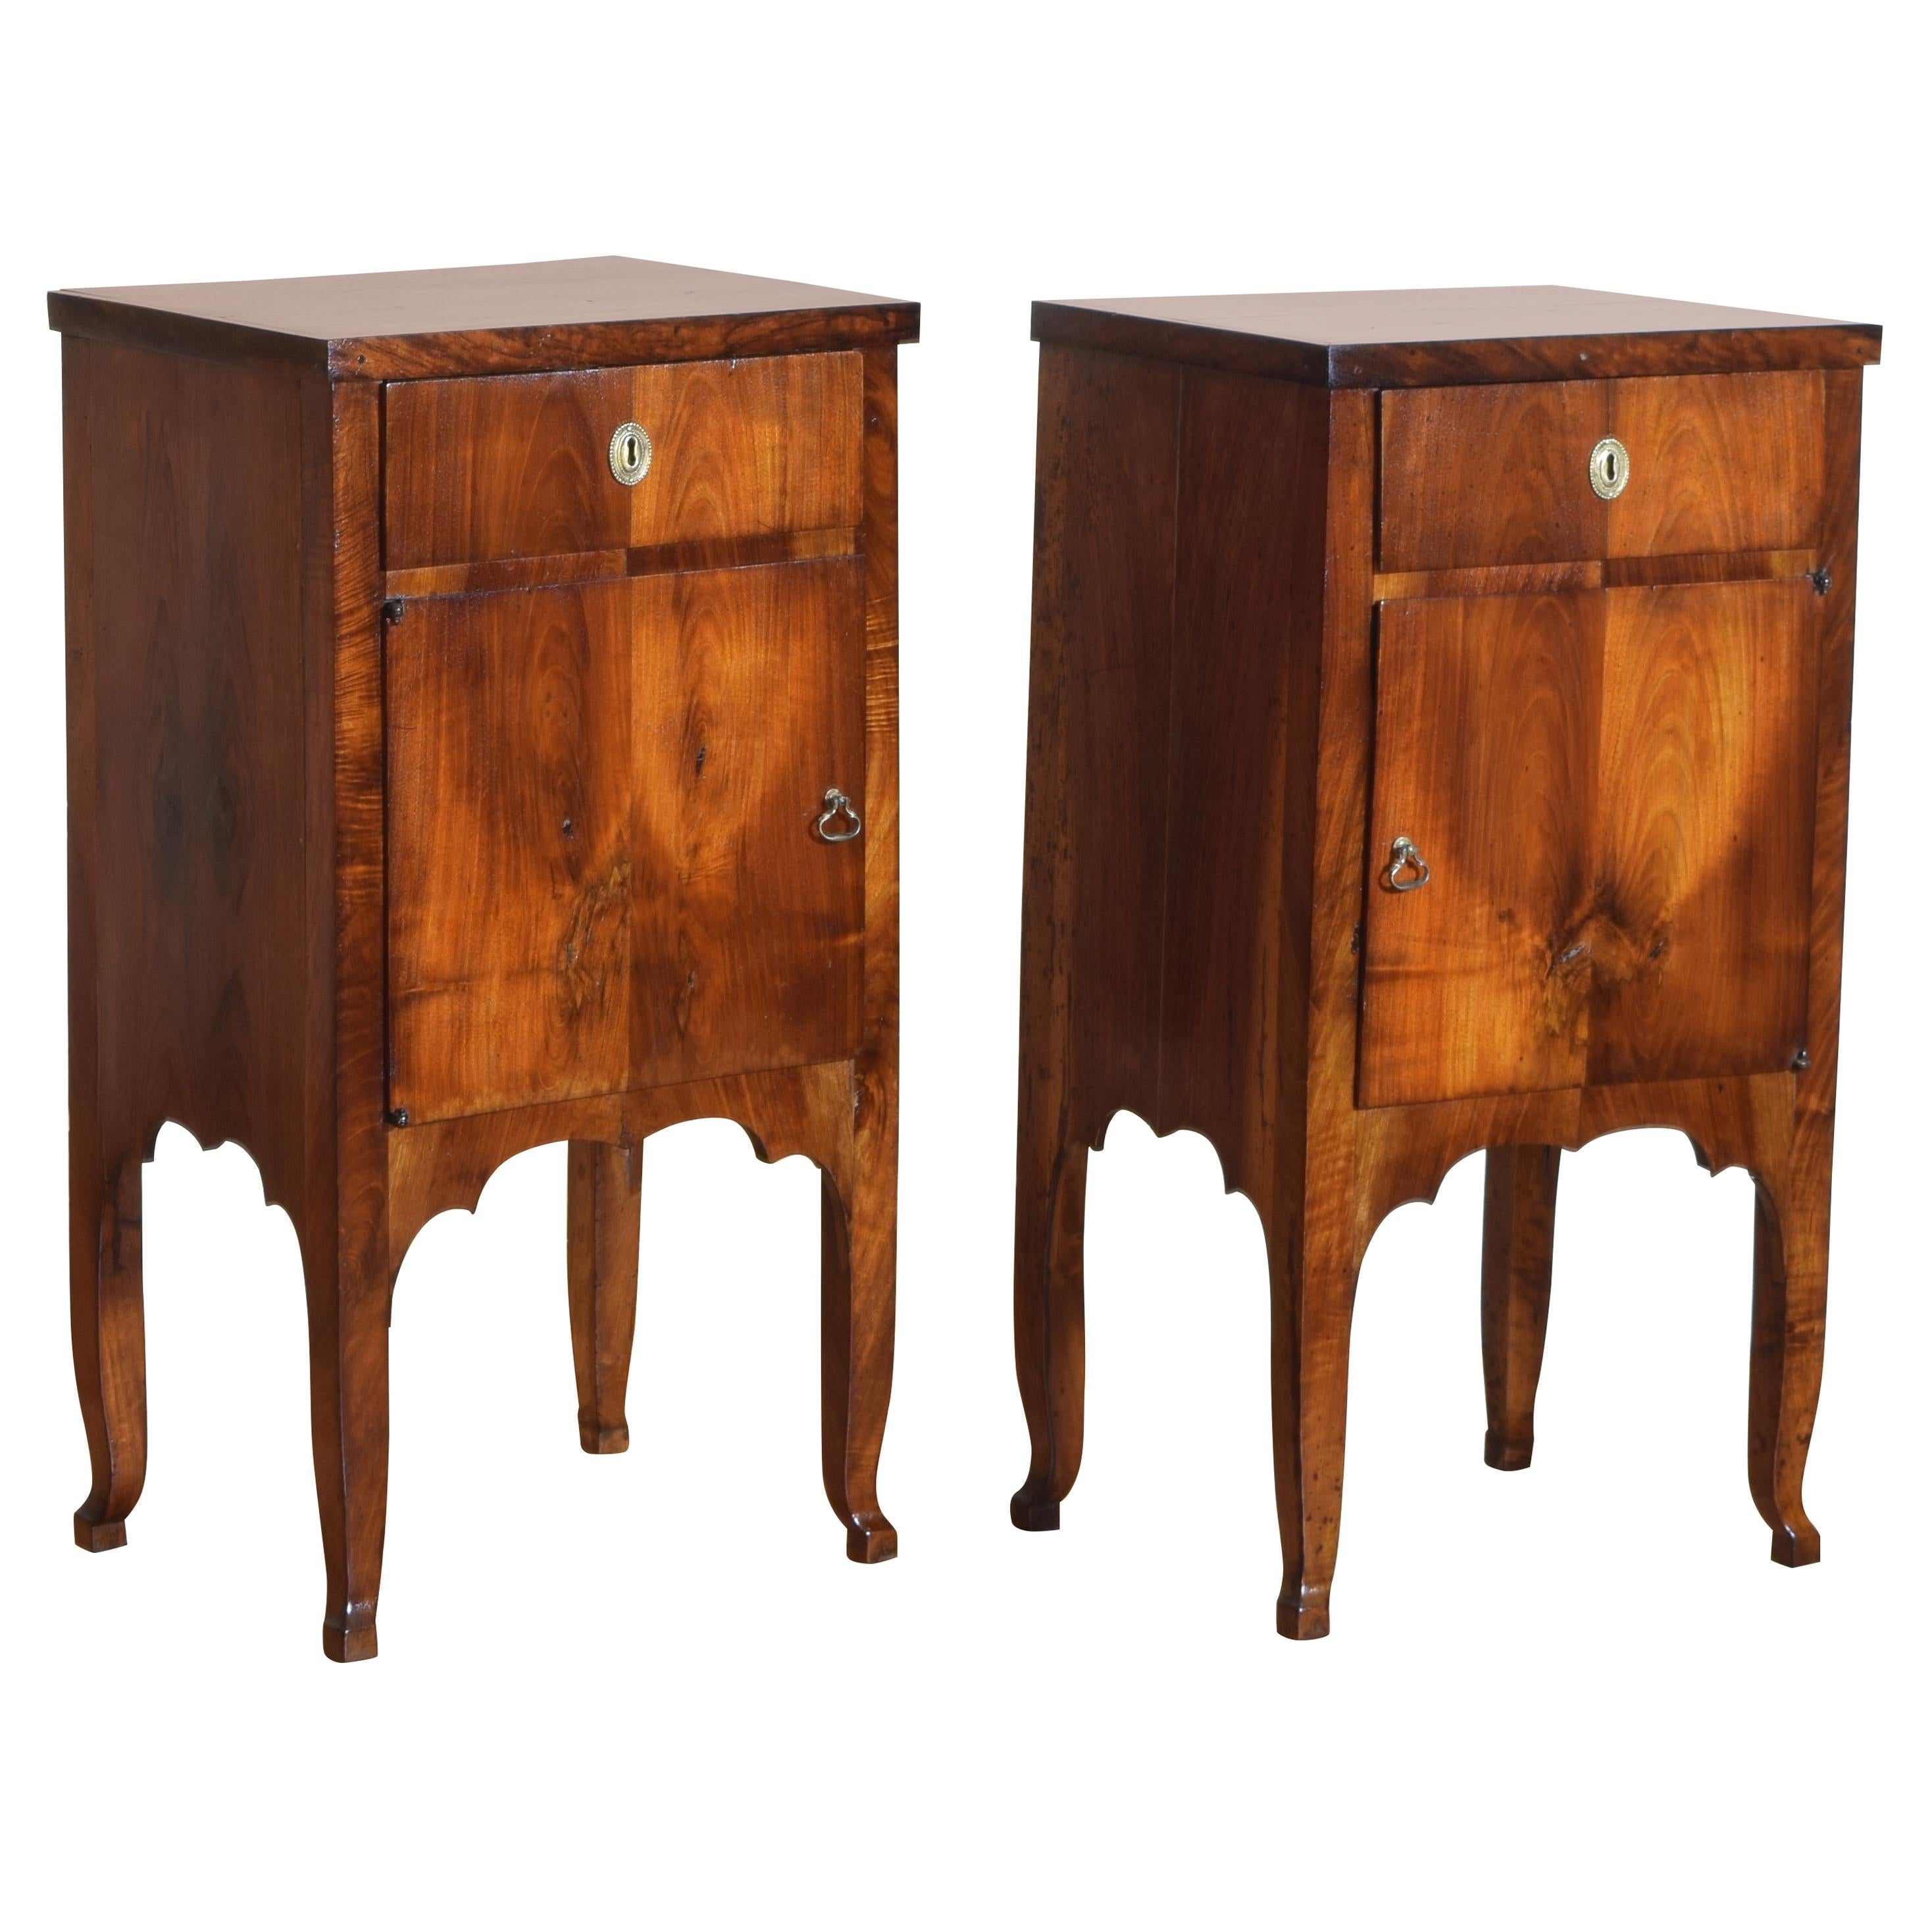 Pair of Northern Italian Figured and Shaped Walnut Bedside Commodes 19th Century